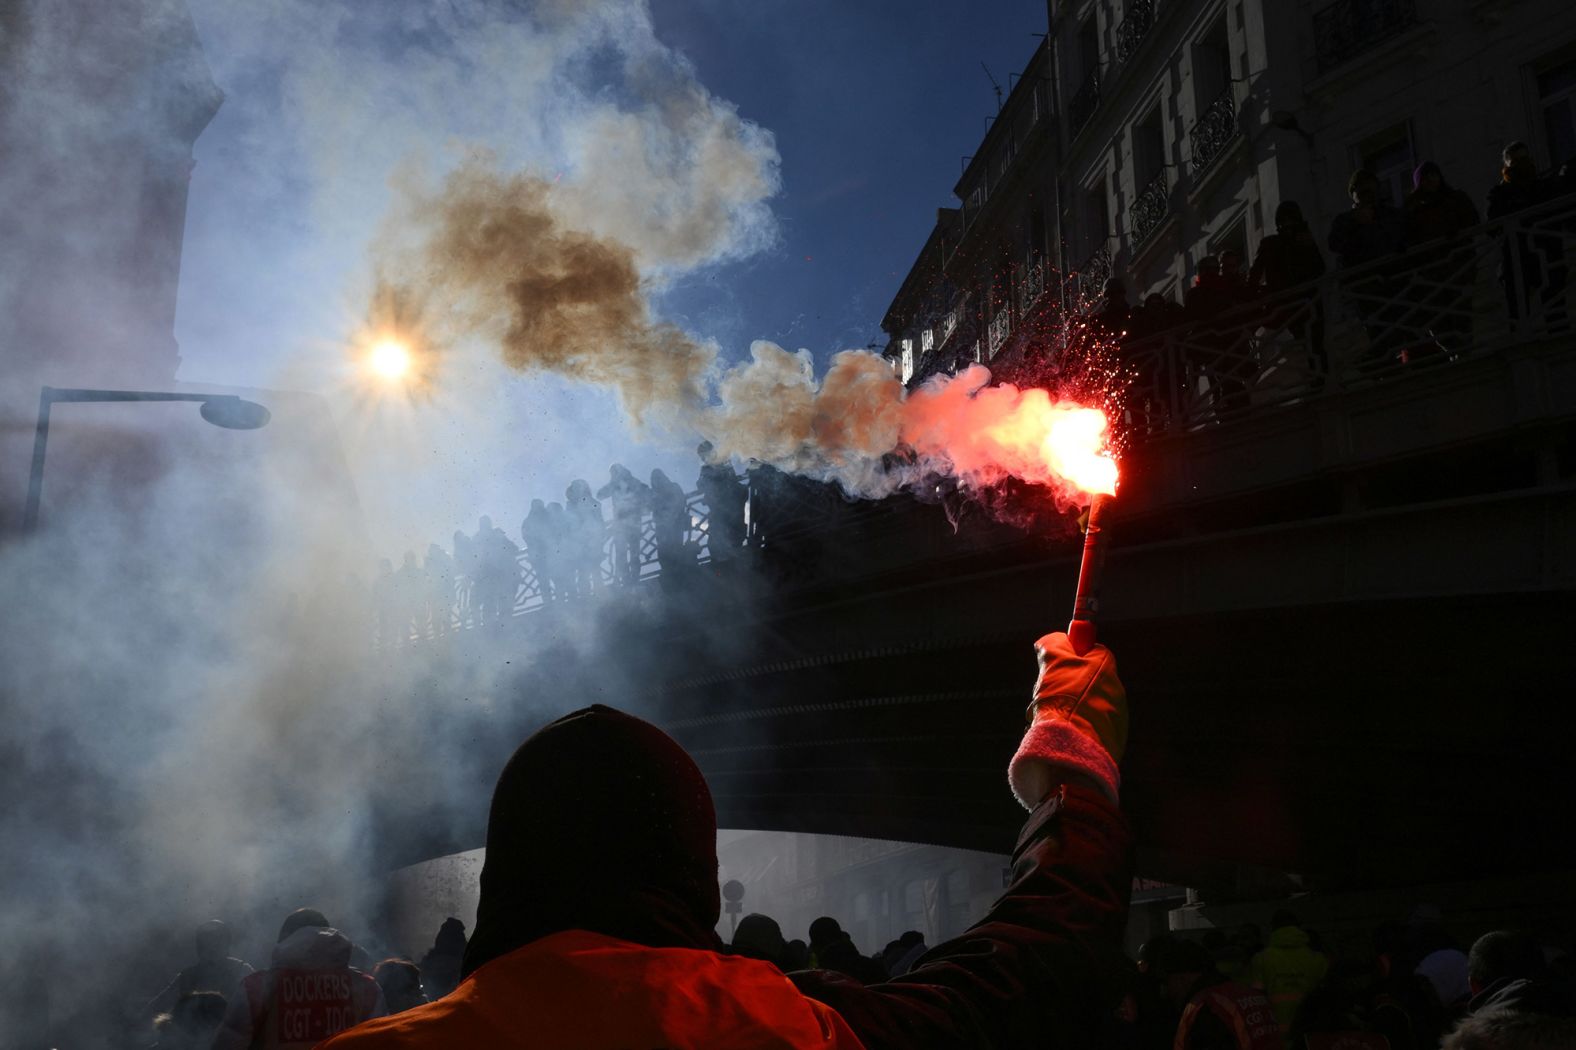 A protester waves a flare during a rally called by French trade unions against the <a href="https://www.cnn.com/2023/01/18/intl_business/france-pension-protests/index.html" target="_blank">government pension reform plan</a> in Marseille, France, on Thursday, January 19.